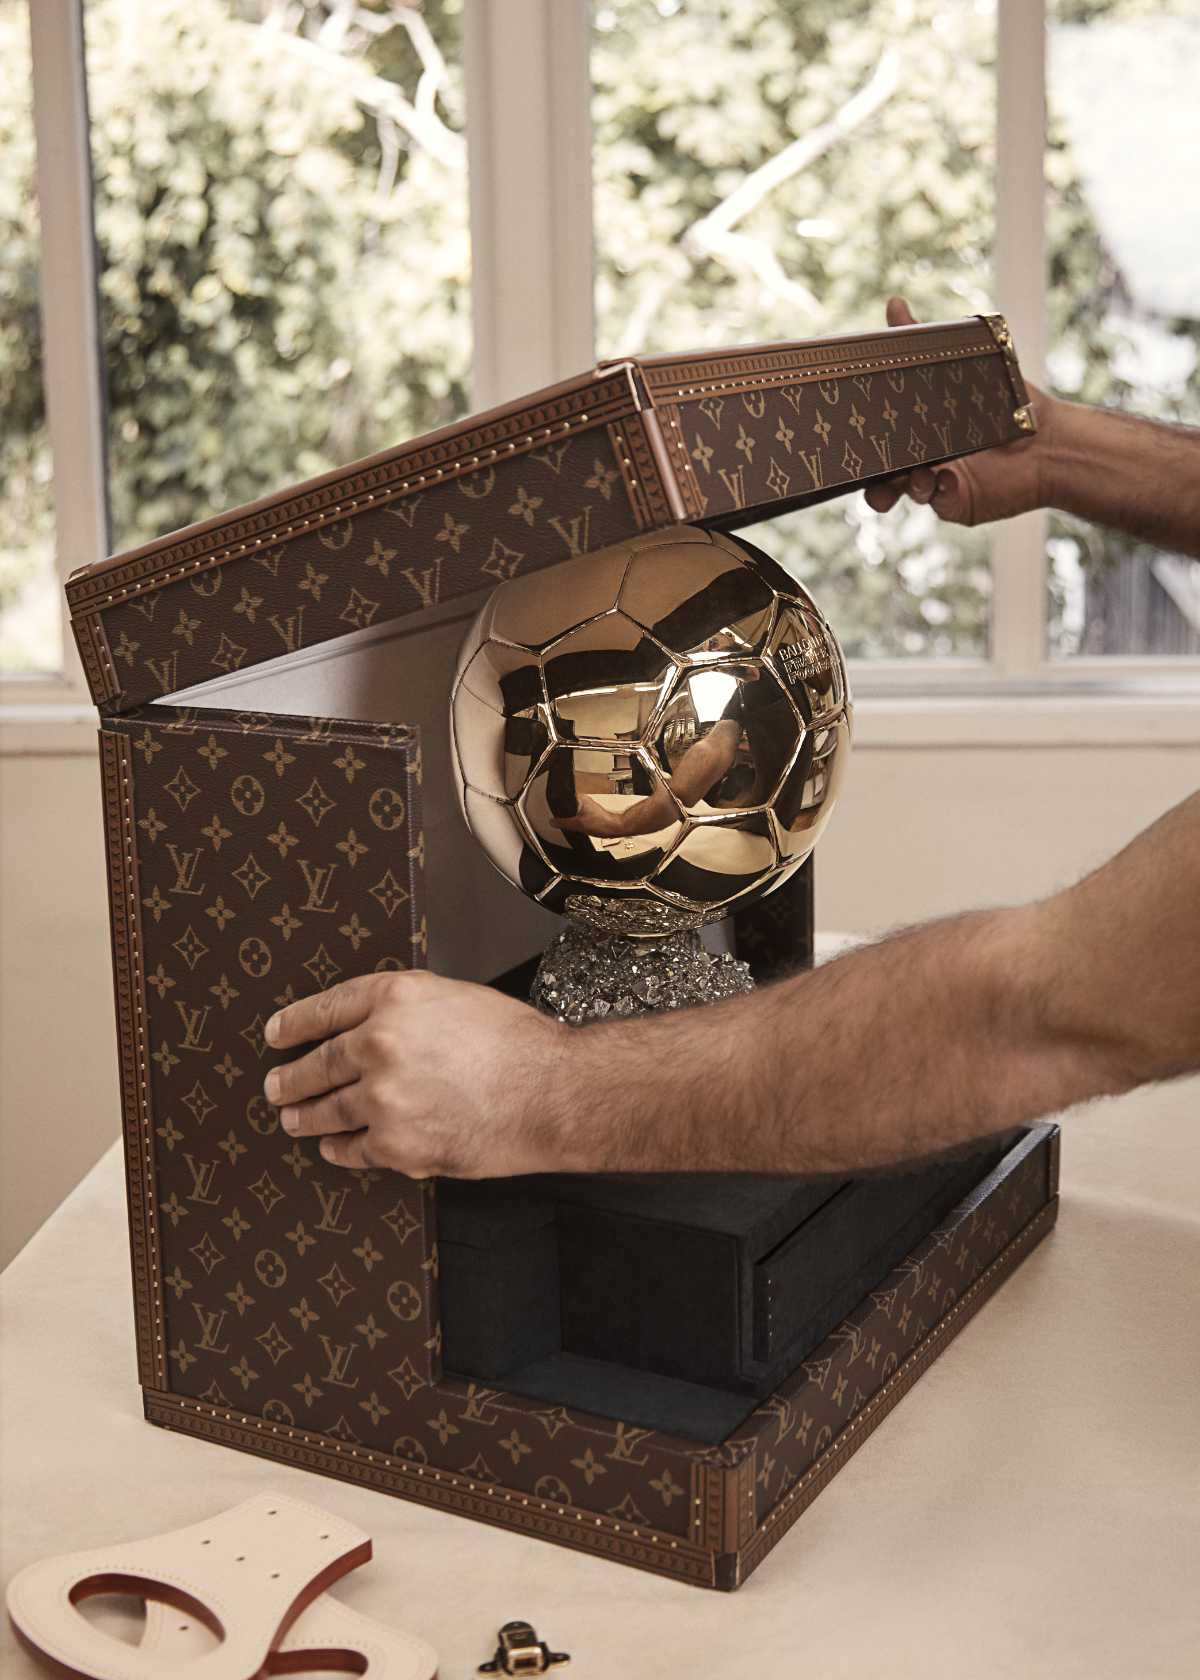 Louis Vuitton Custom Trunk for World Cup Trophy 2014